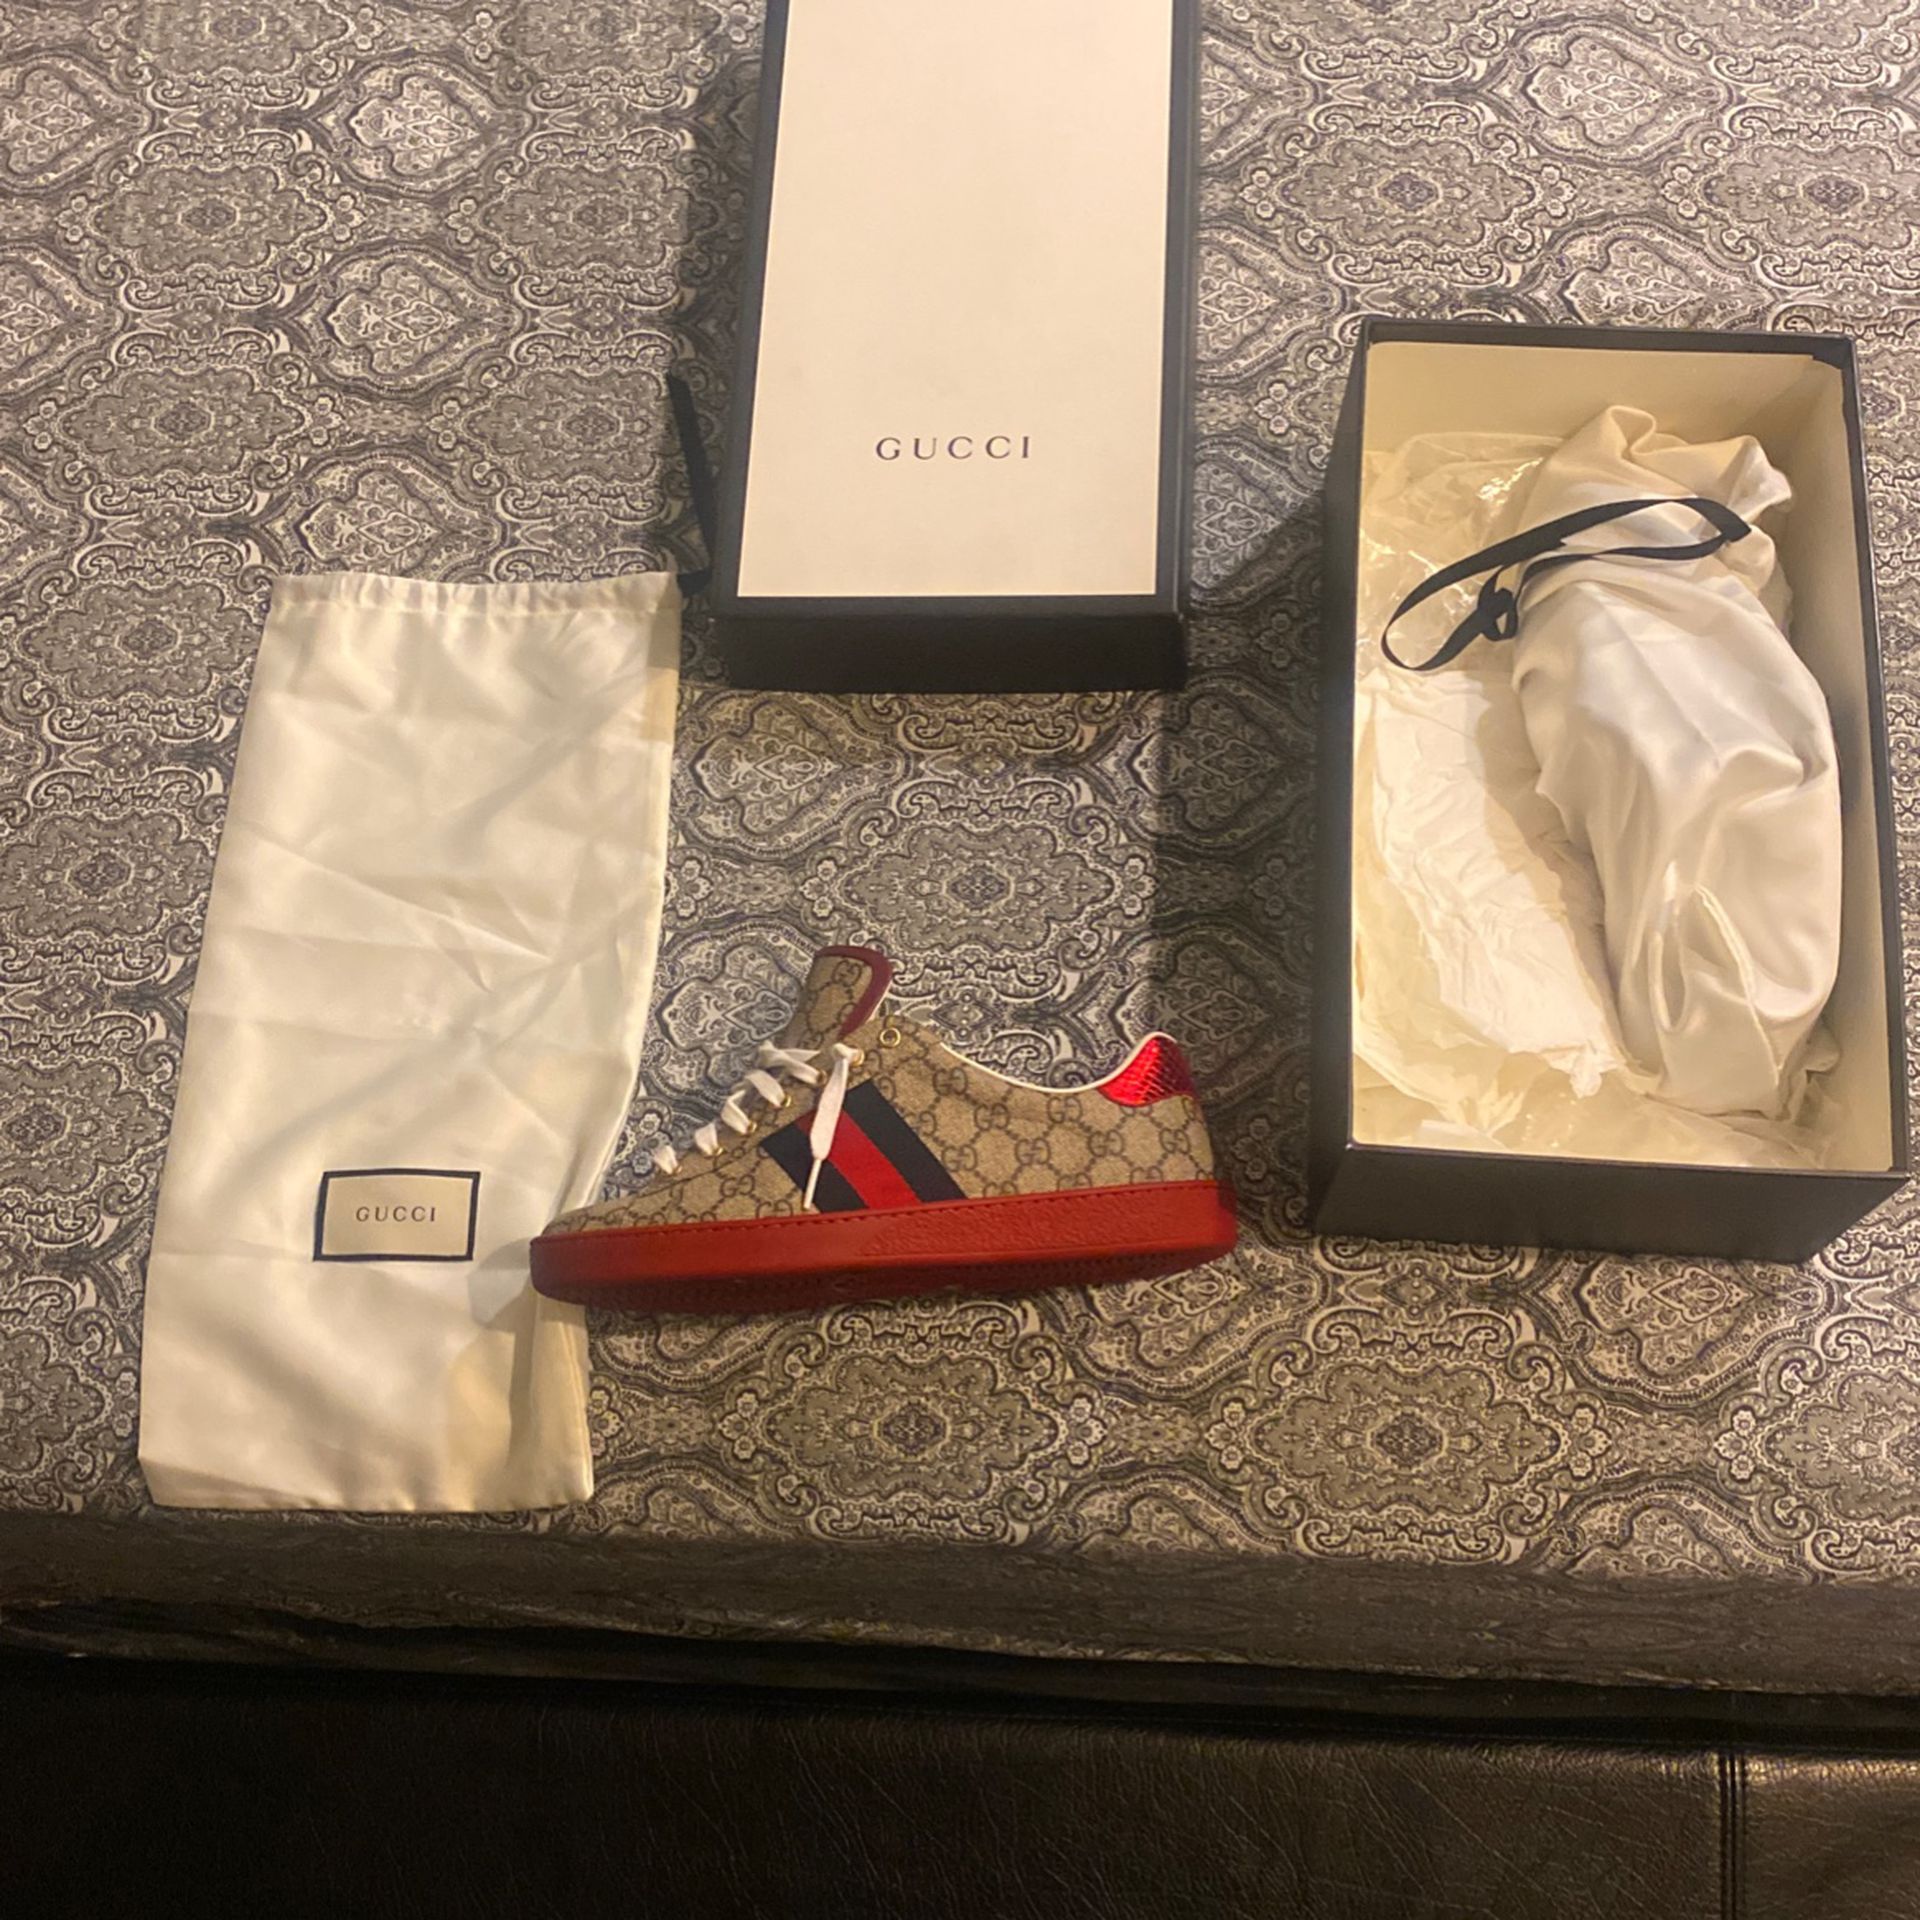 Gucci Shoes Size 8 1/2 Still In Decent Conditioning I Can’t Fit Them They Are Really Nice Expensive Shoes I’m Asking For 300$ OBO Need Them Gone Asap